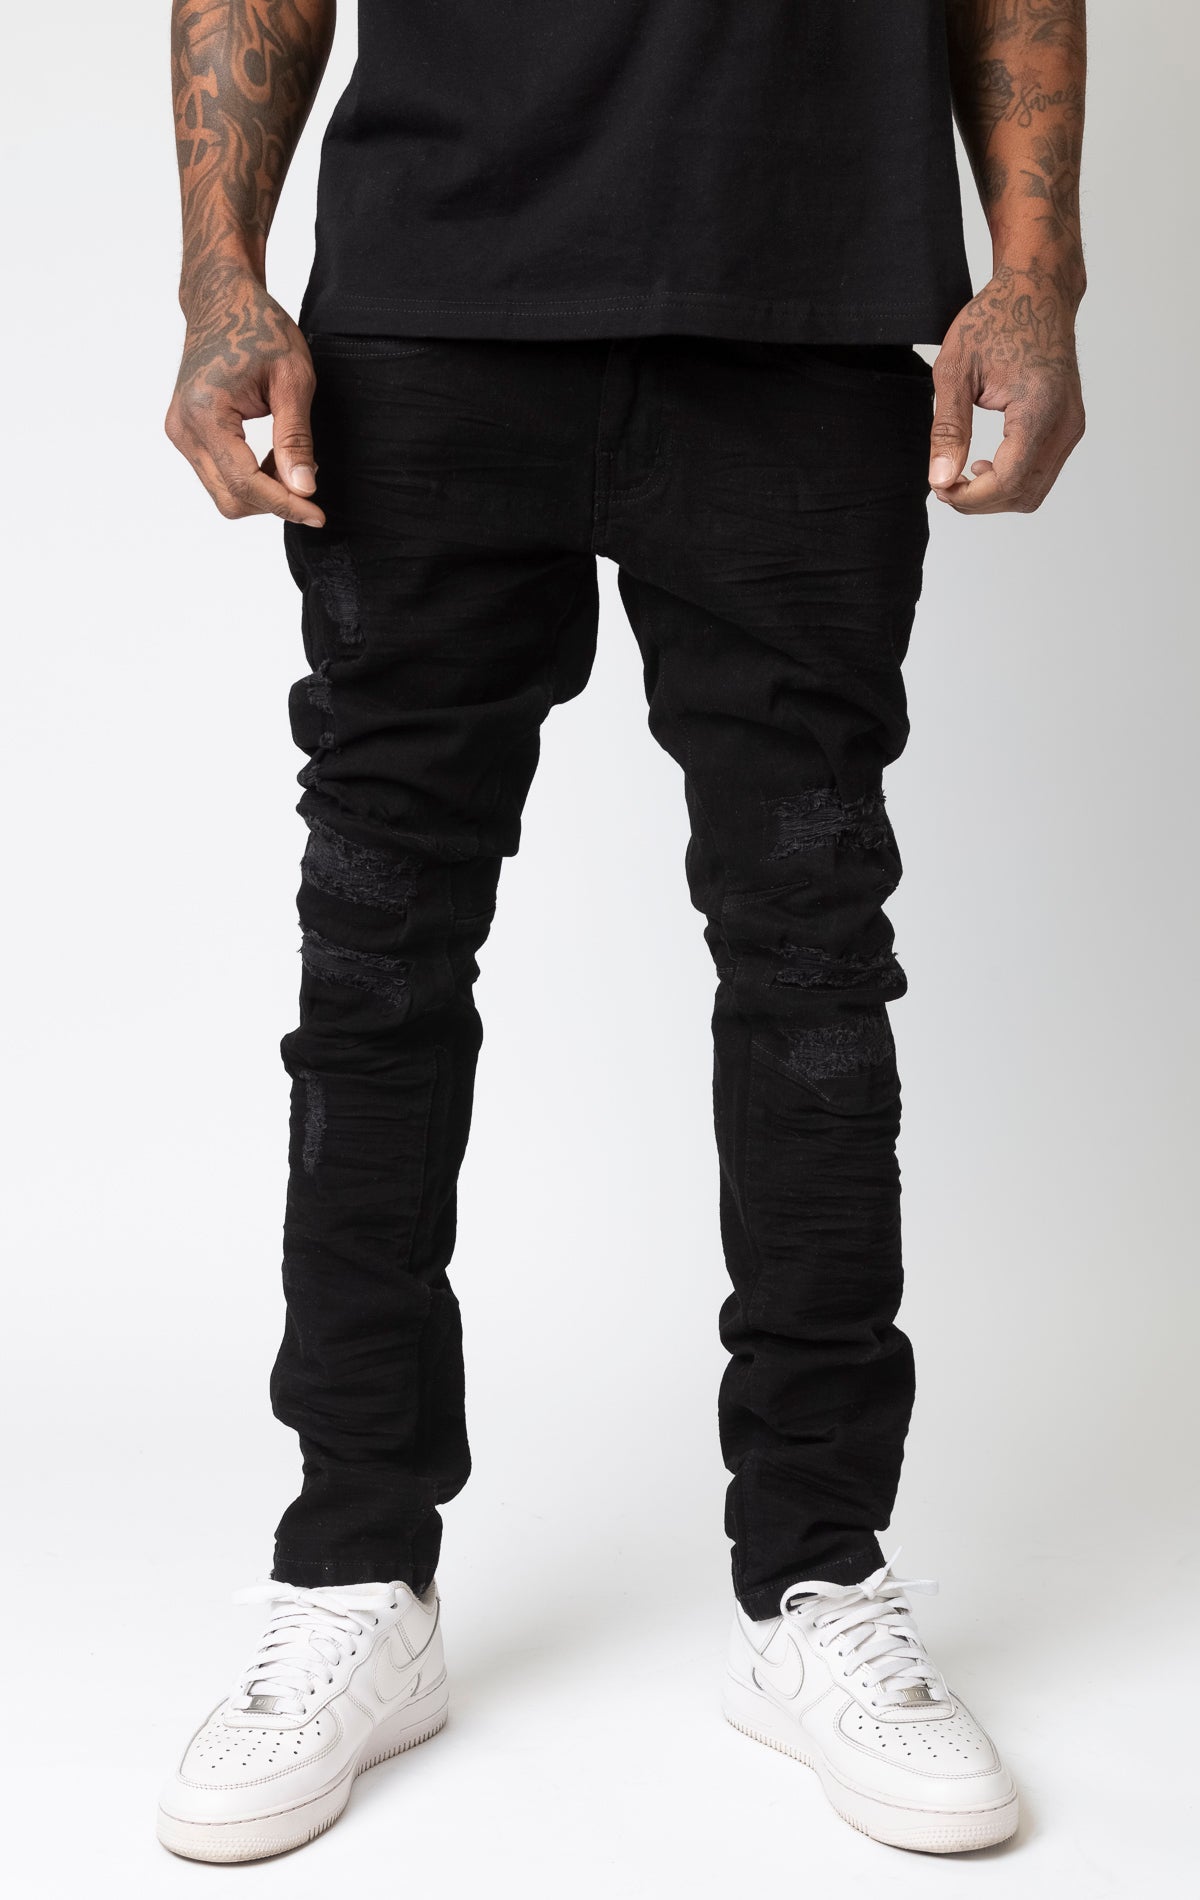 Black Washed up slim fit denim jeans, rip and repair style.